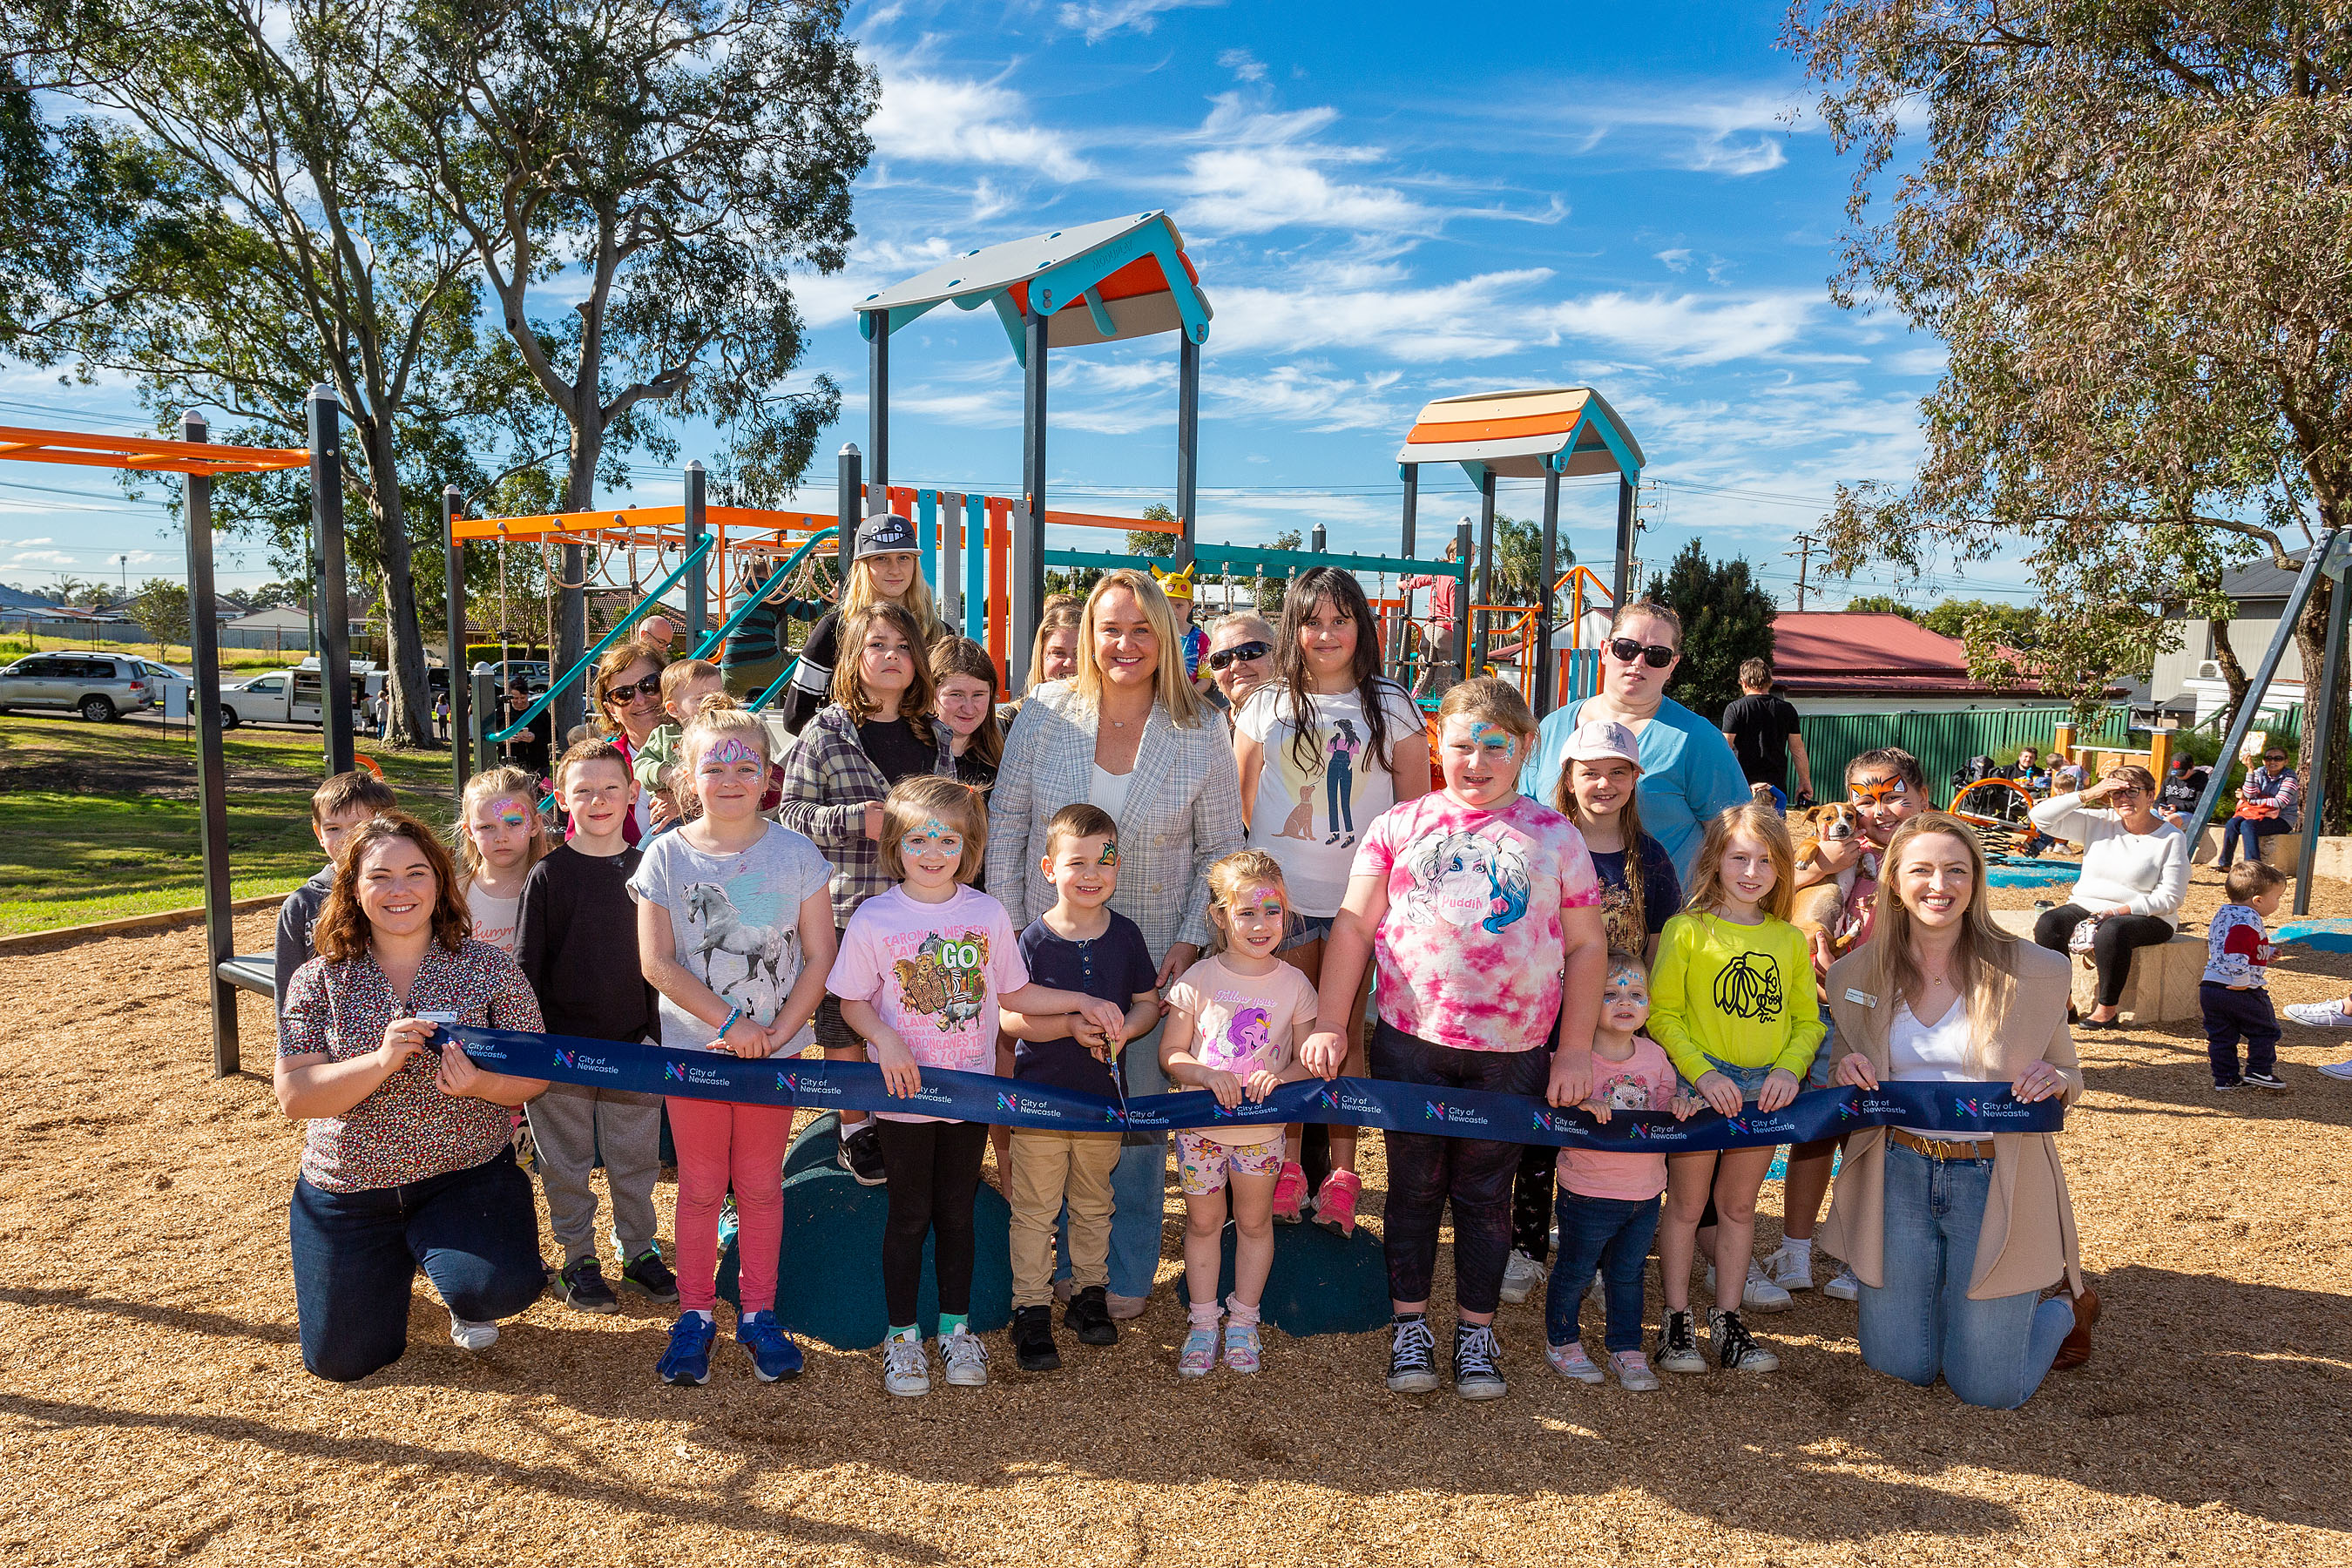 Lord-Mayor-Nuatali-Nelmes-opening-a-new-playground-in-Tarro-with-the-community-in-2022.jpg